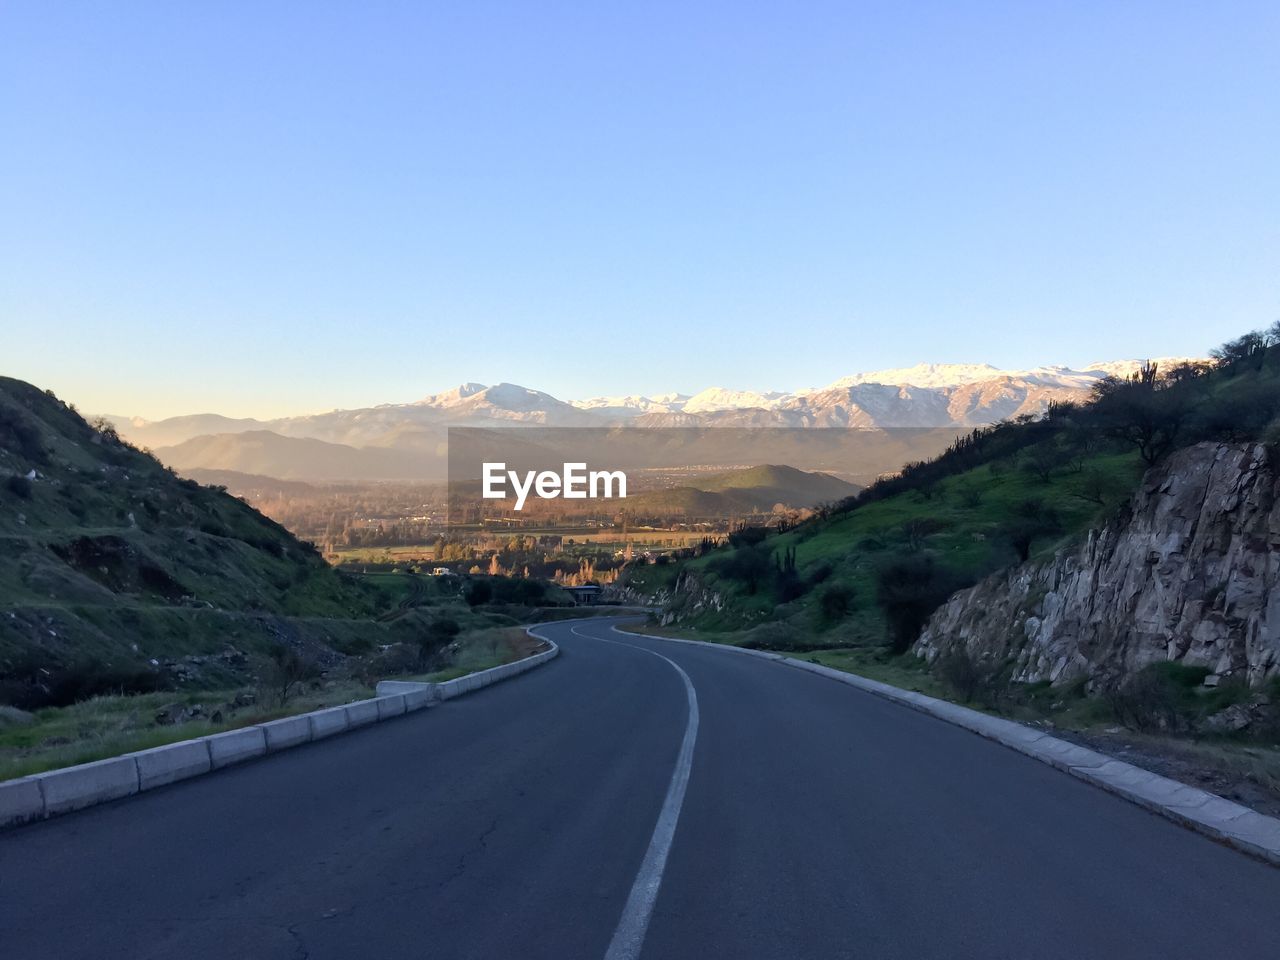 ROAD BY MOUNTAIN AGAINST CLEAR SKY